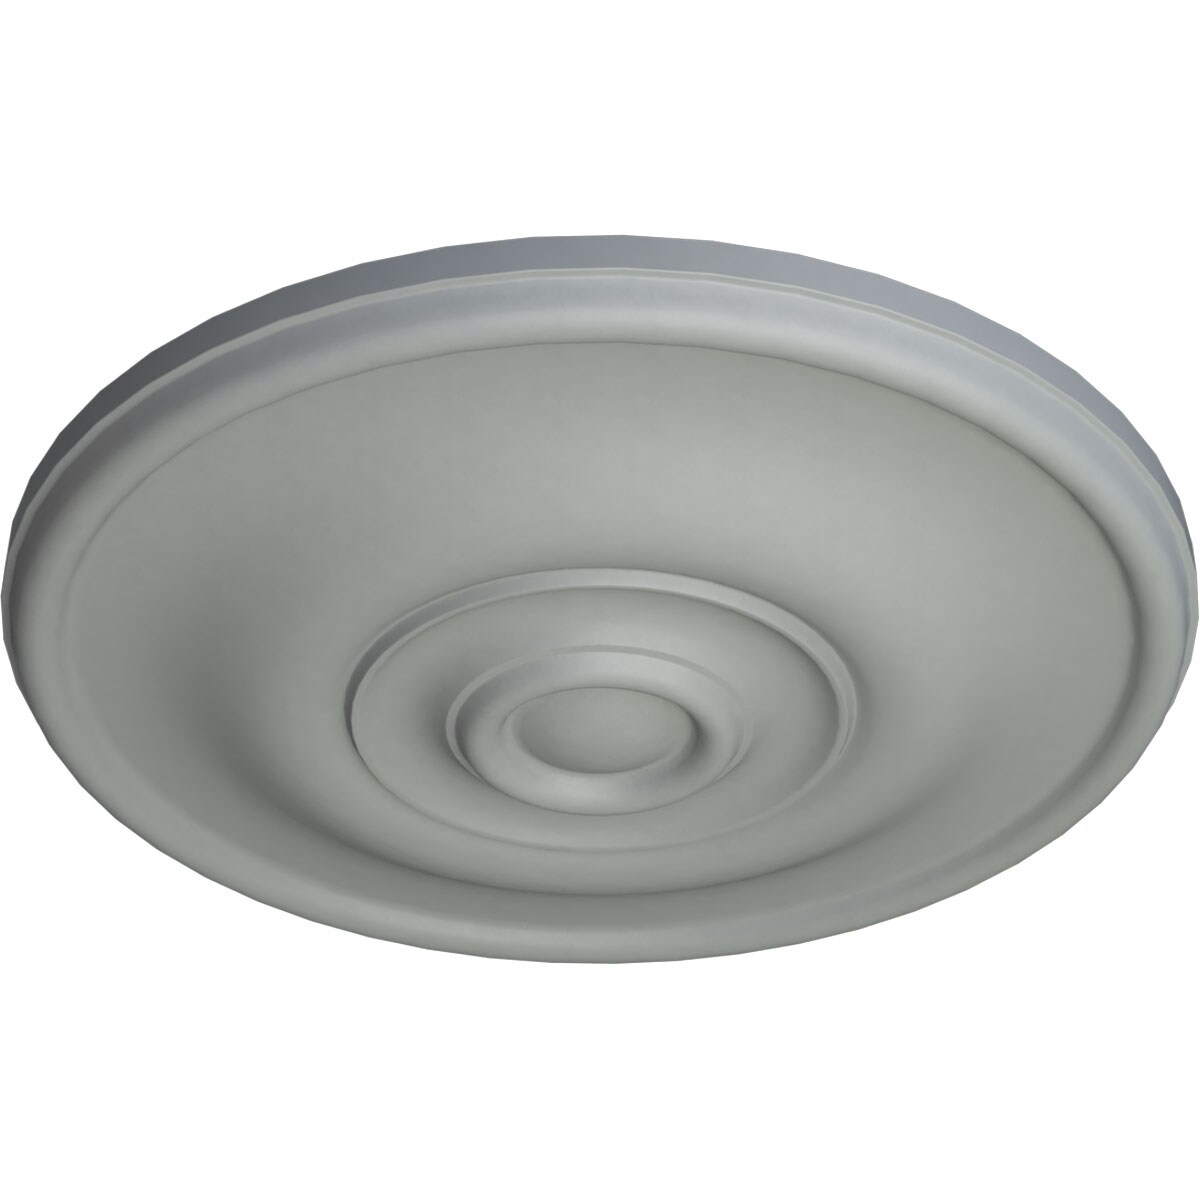 Breezy Ceiling Rose Polystyrene Easy Fit Very Light Weight 